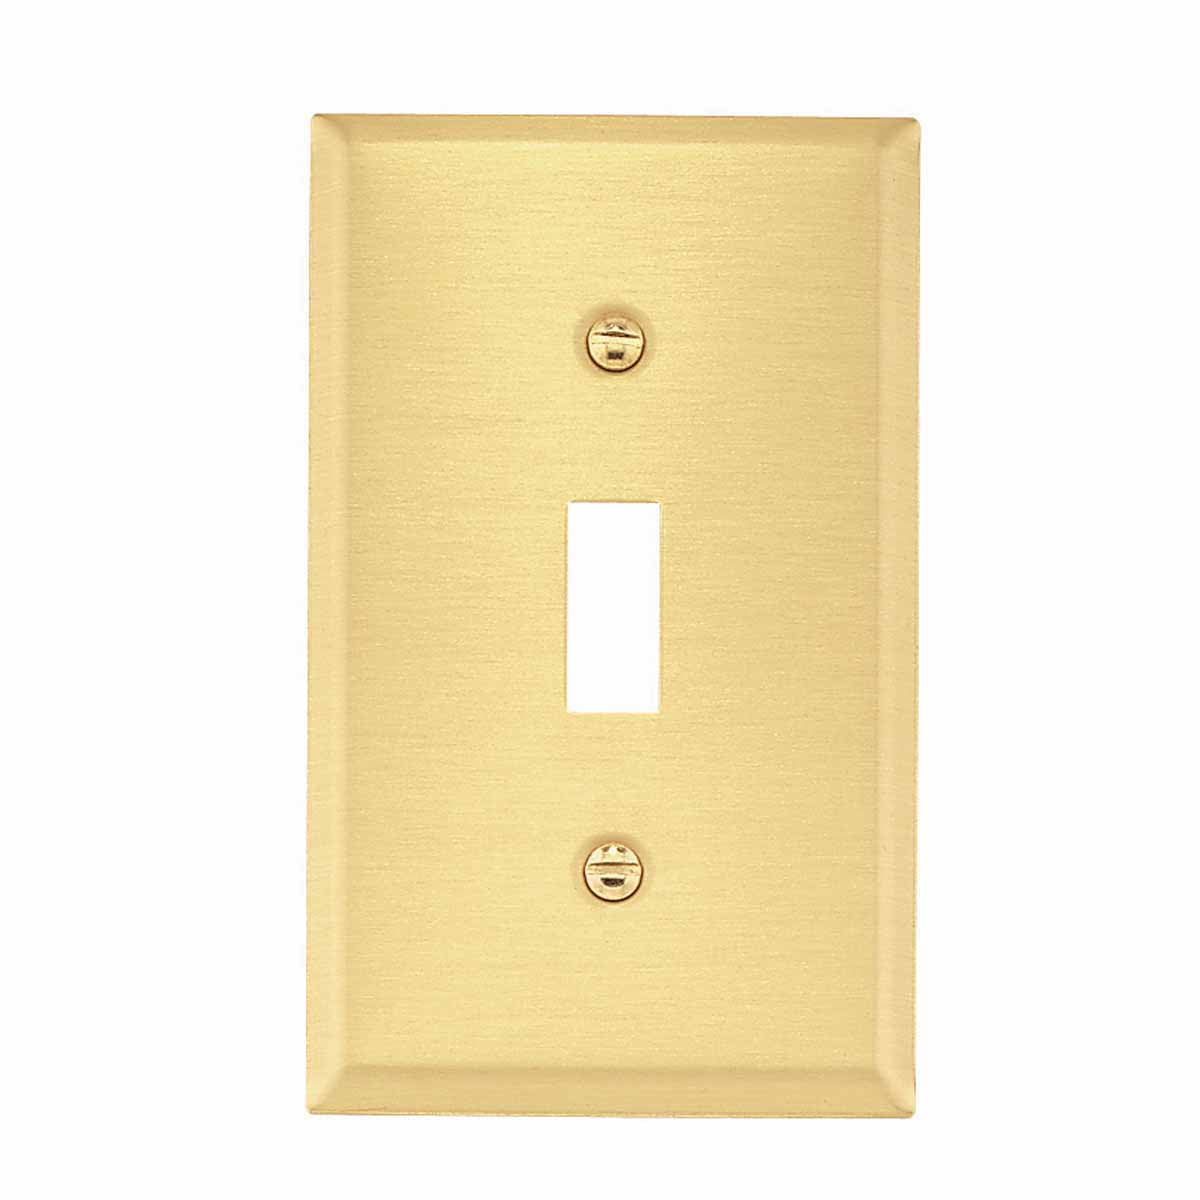 brass switch plate And Outlet covers By Angelo 